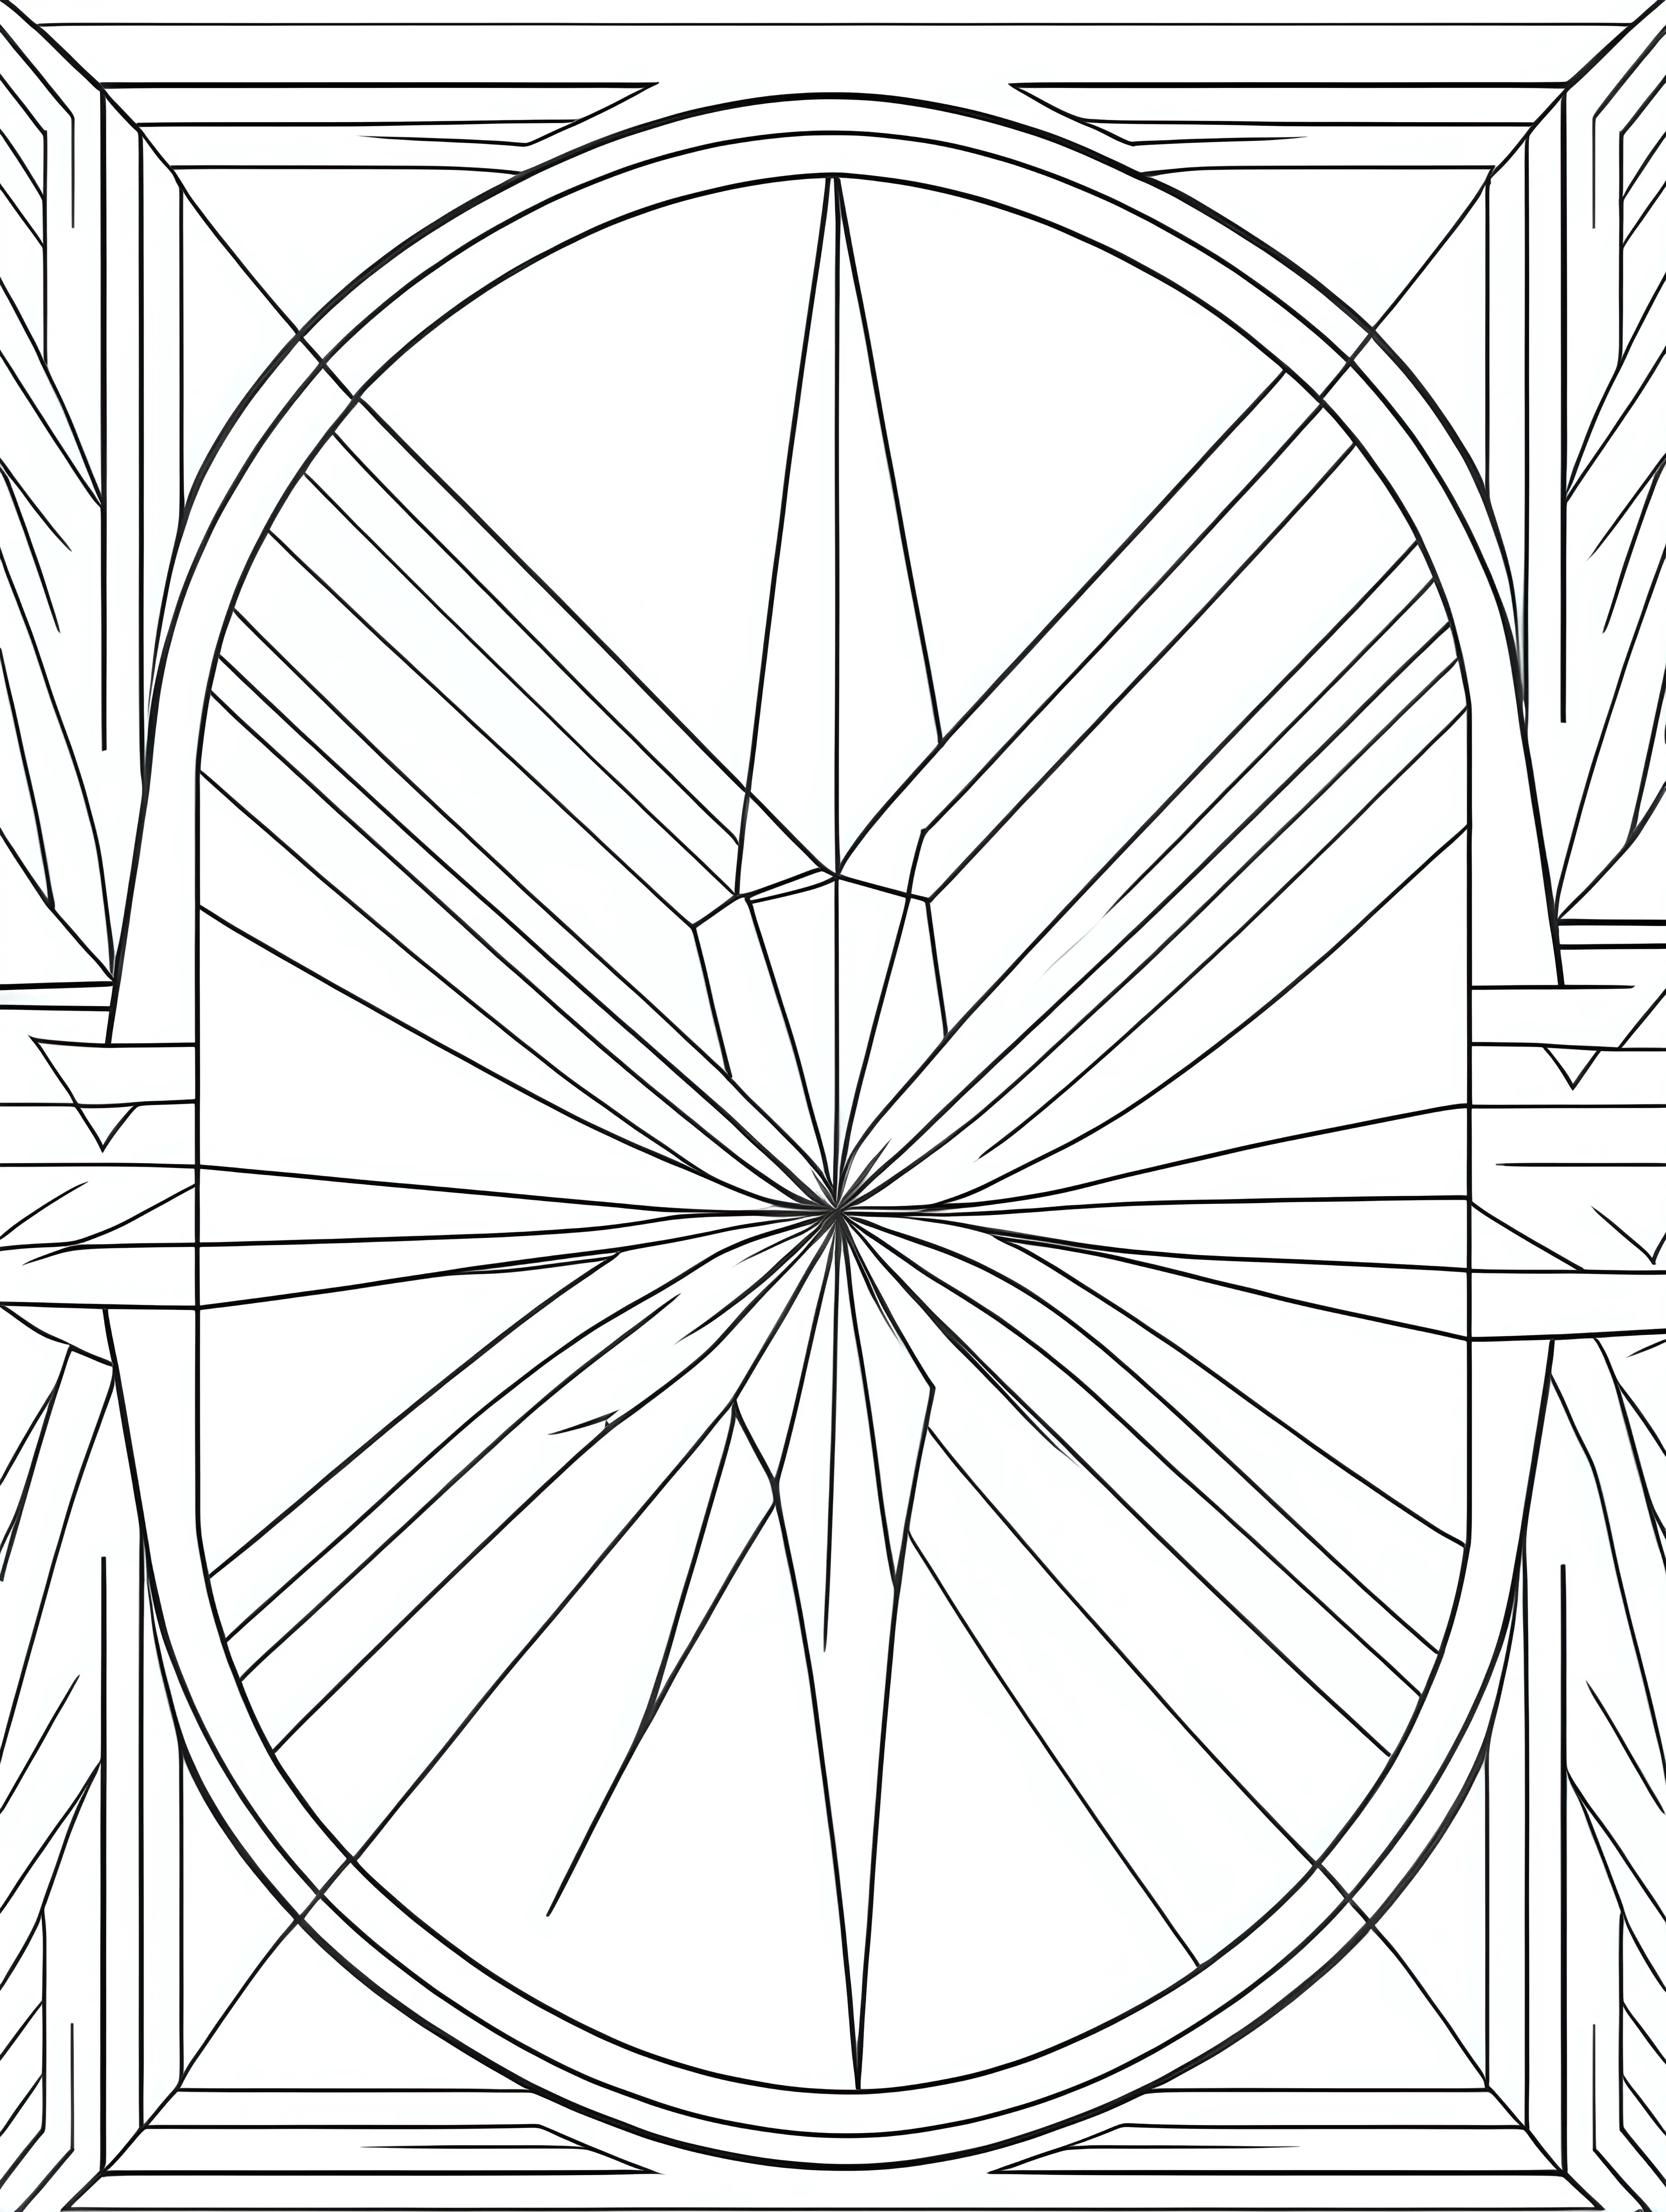 large geometric shapes, no shading, white background, easy coloring pages, no grayscale, 2d clean designs